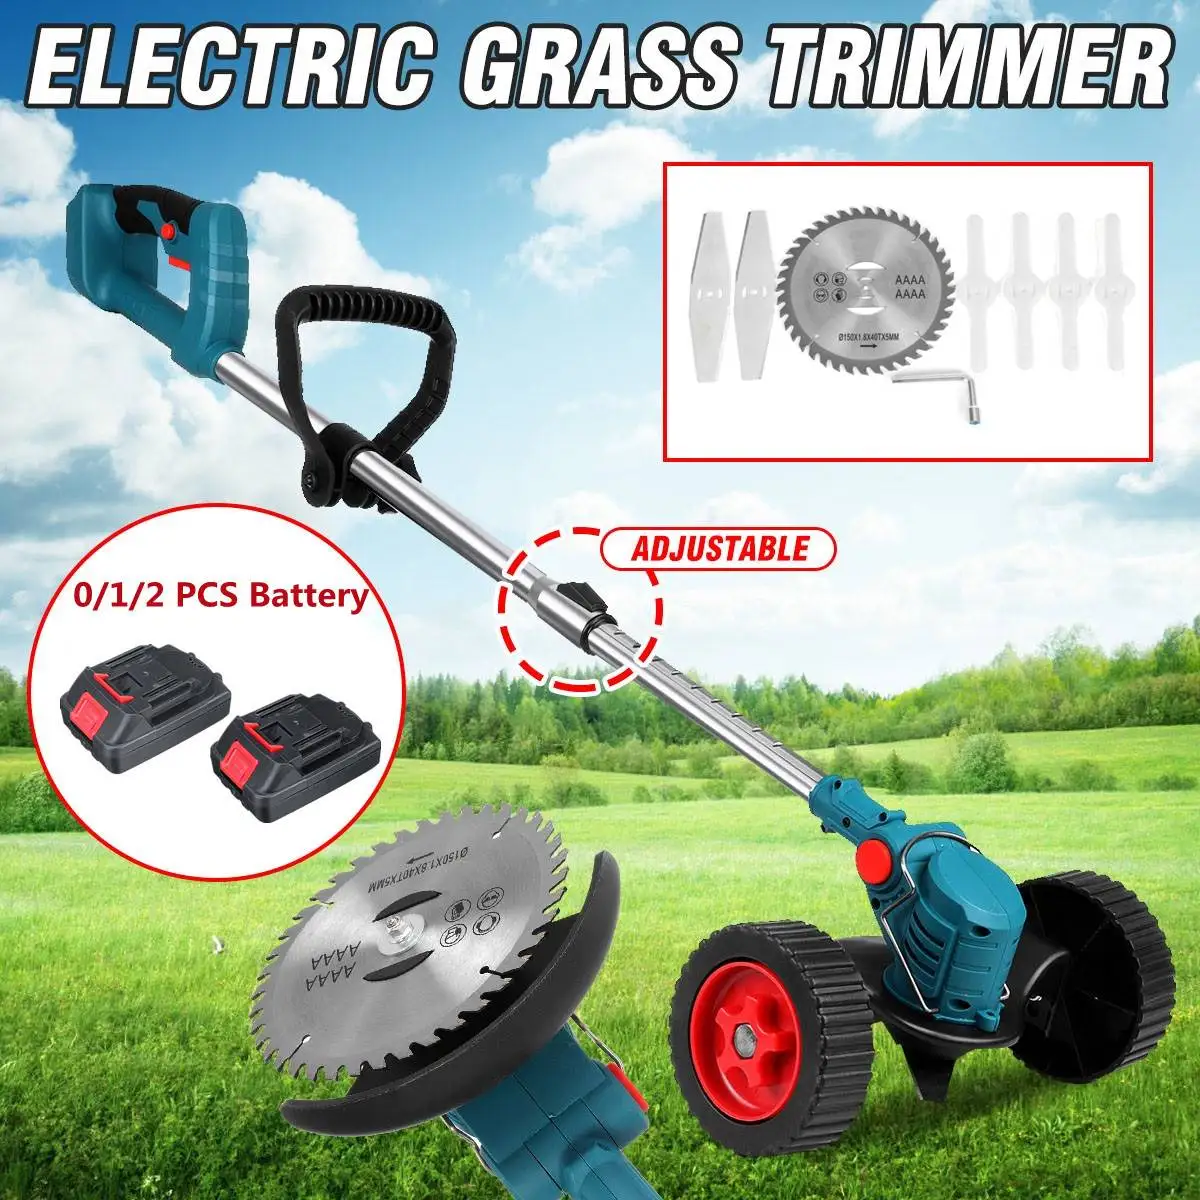 

Electric Grass Trimmer 900W Cordless Lawn Mower Hedge Trimmer Adjustable Handheld Garden Power Tool For Makita 18V Battery